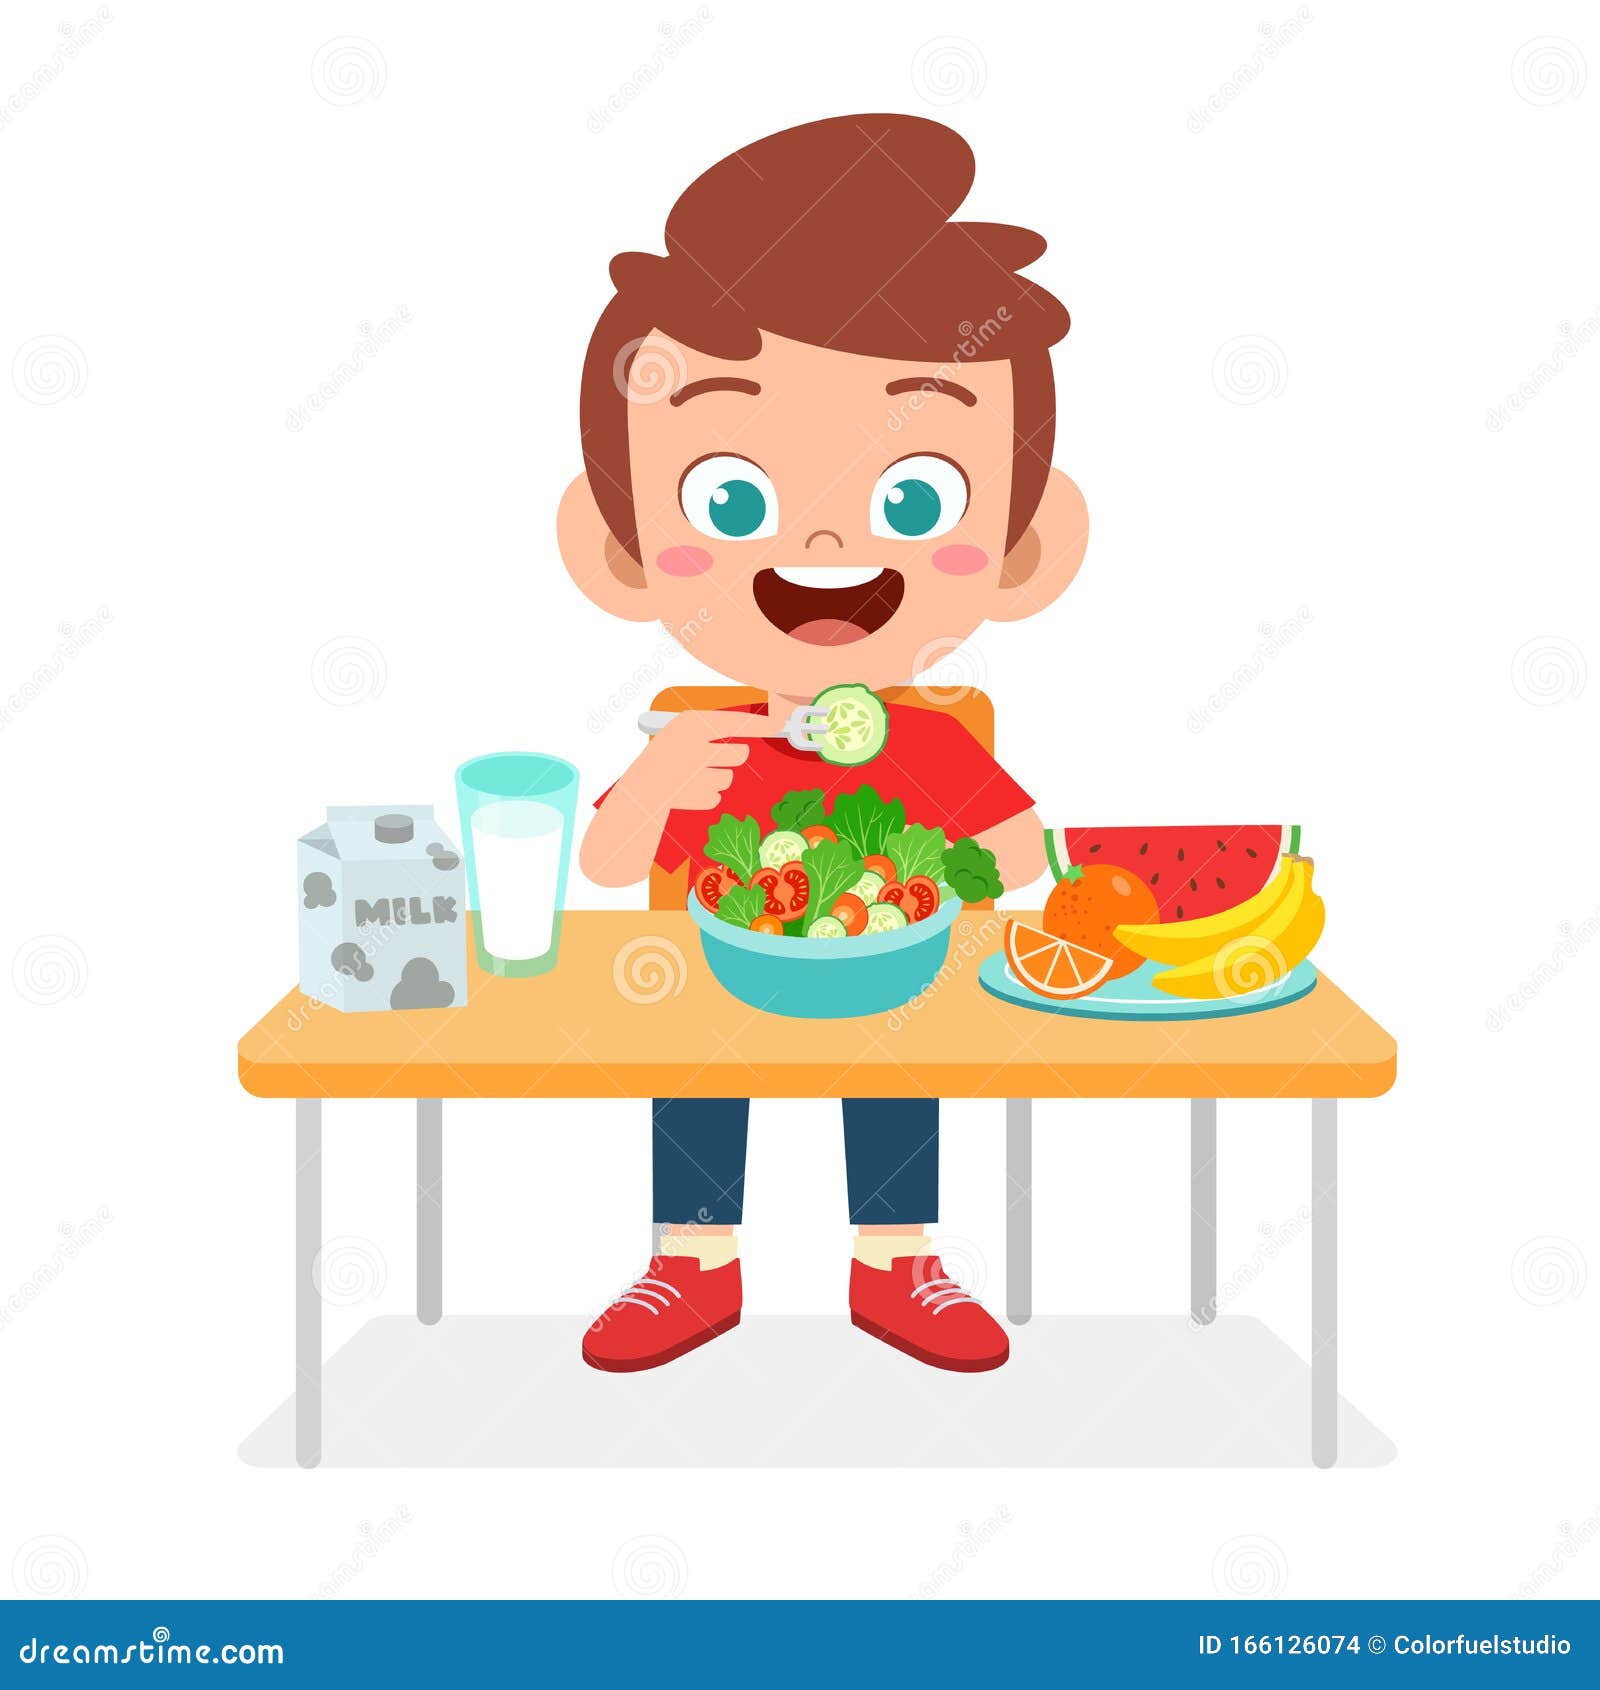 Eat Cartoons, Illustrations & Vector Stock Images - 542215 Pictures to